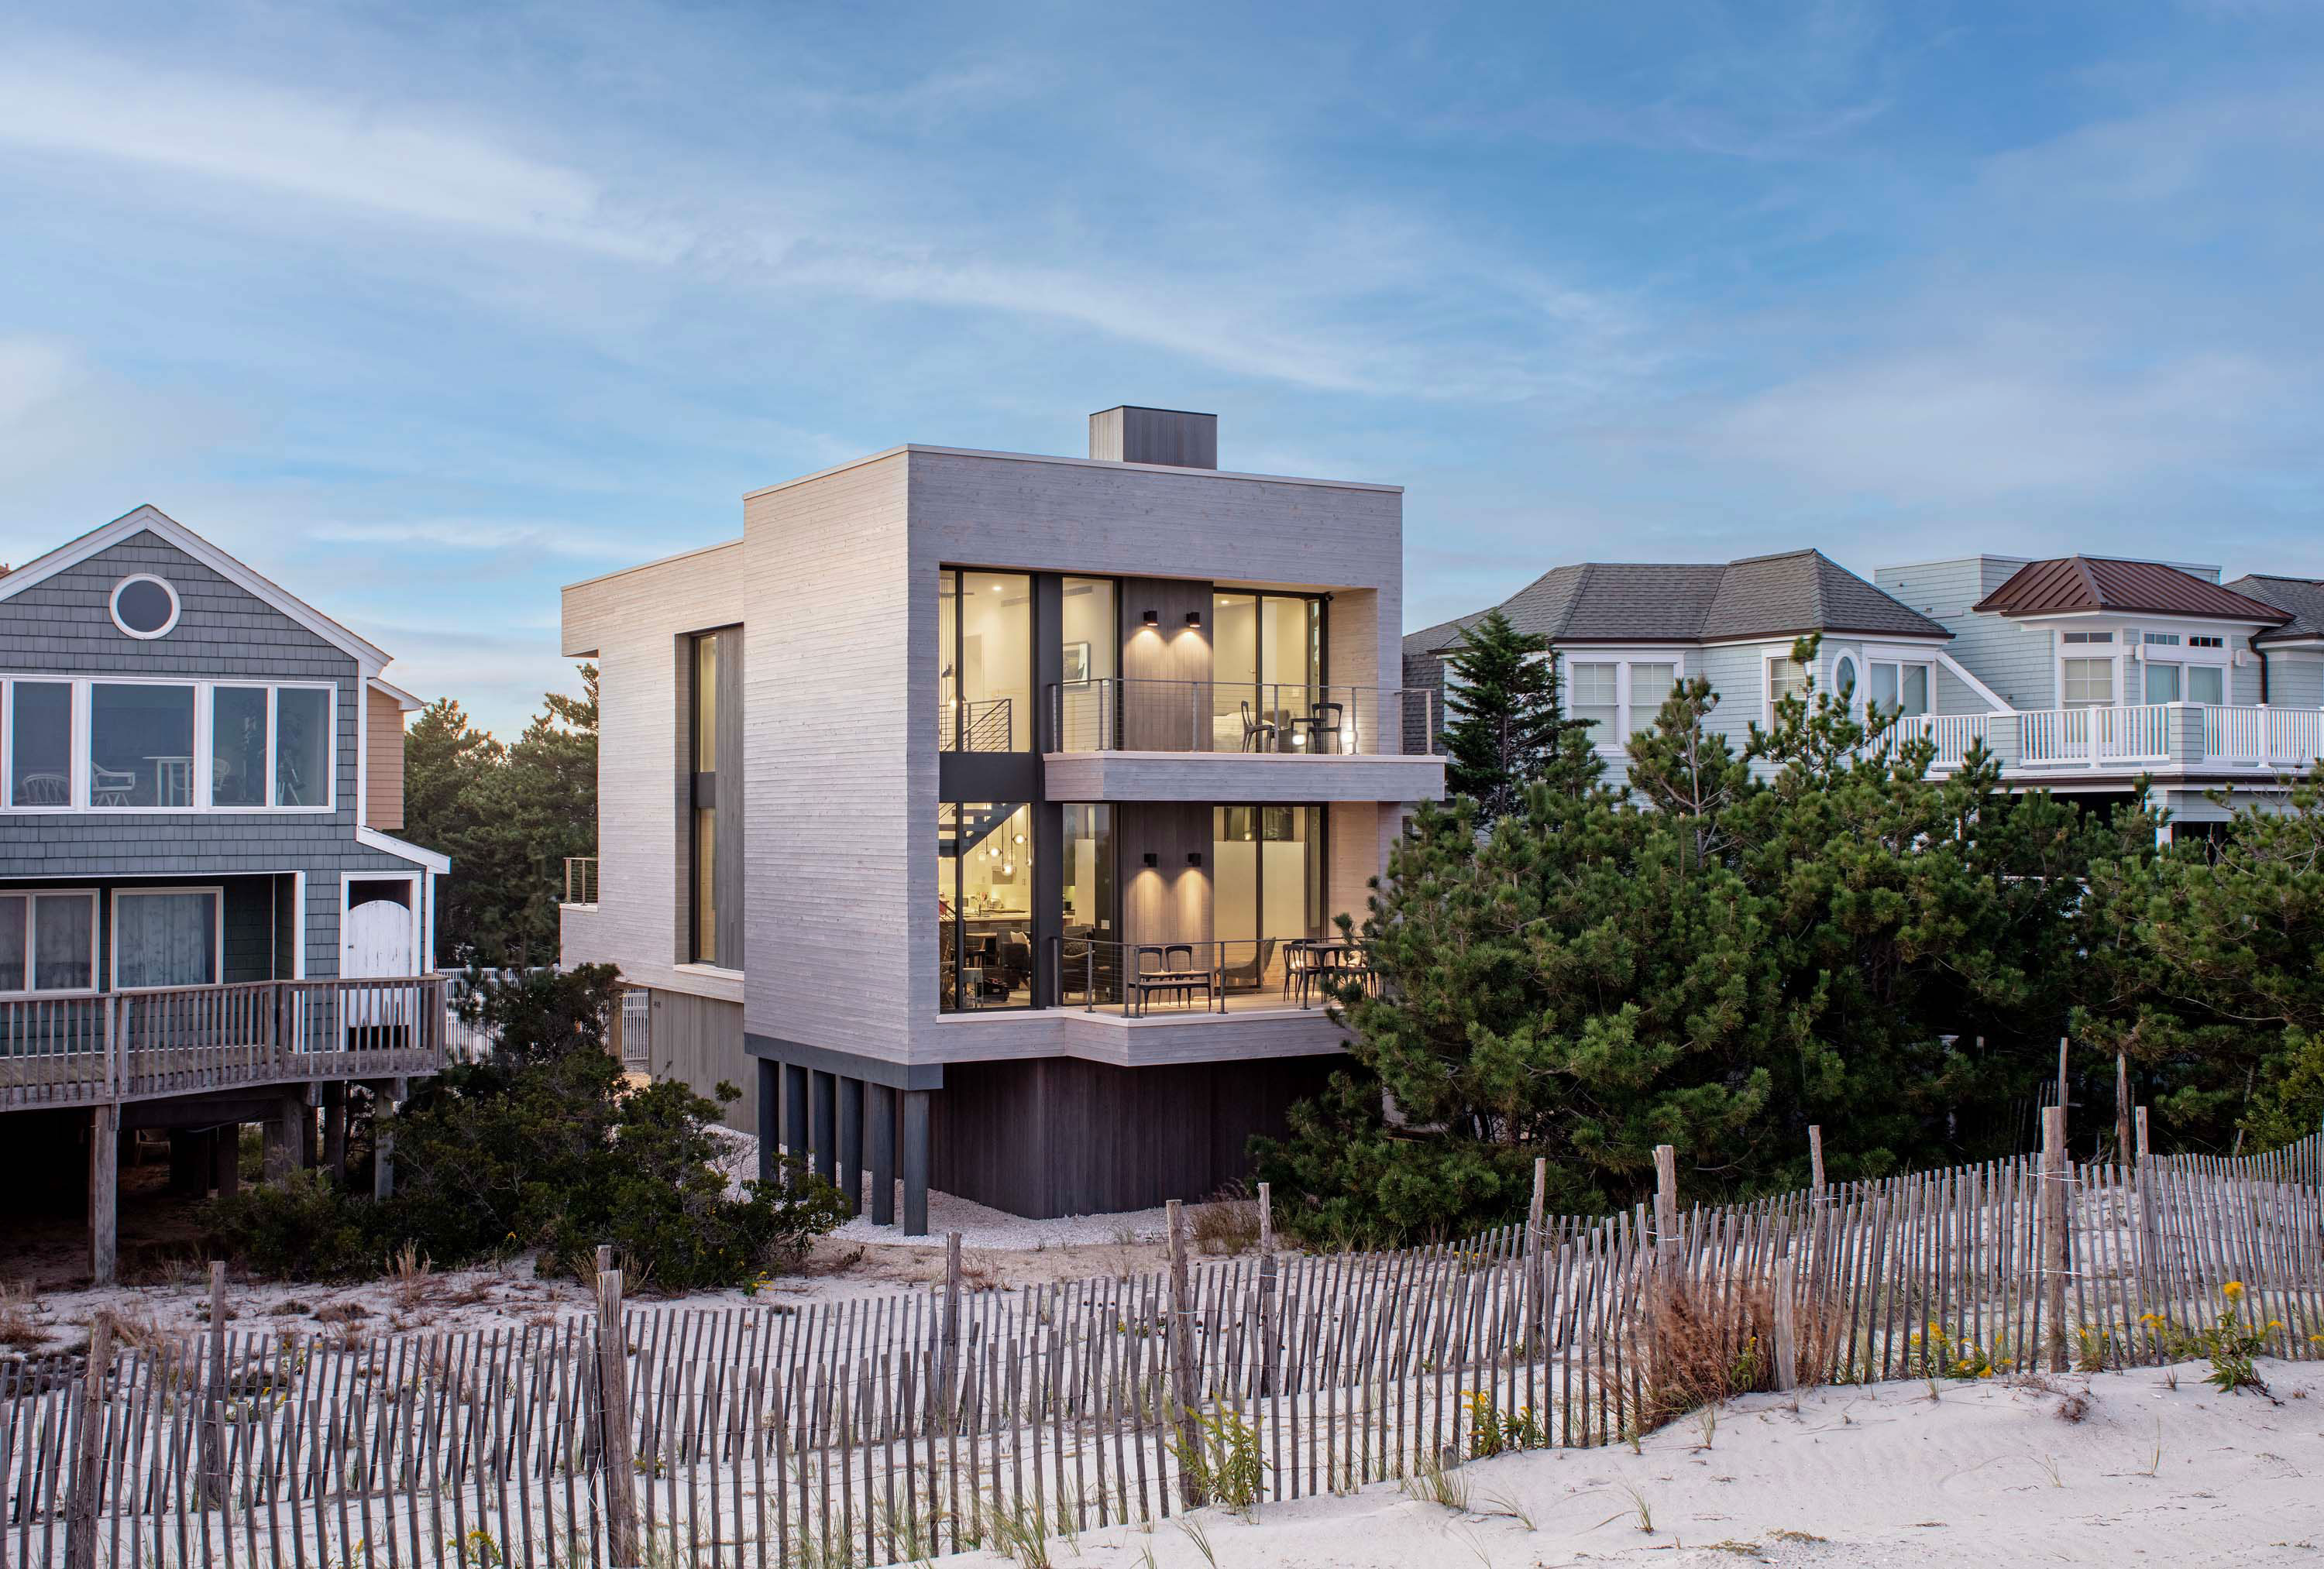 Exterior photo of the Beach Haven Residence by Specht Novak Architects. Shot by Taggart Sorenson featuring the facade of the home and the stylistic contrast amongst the surrounding properties.